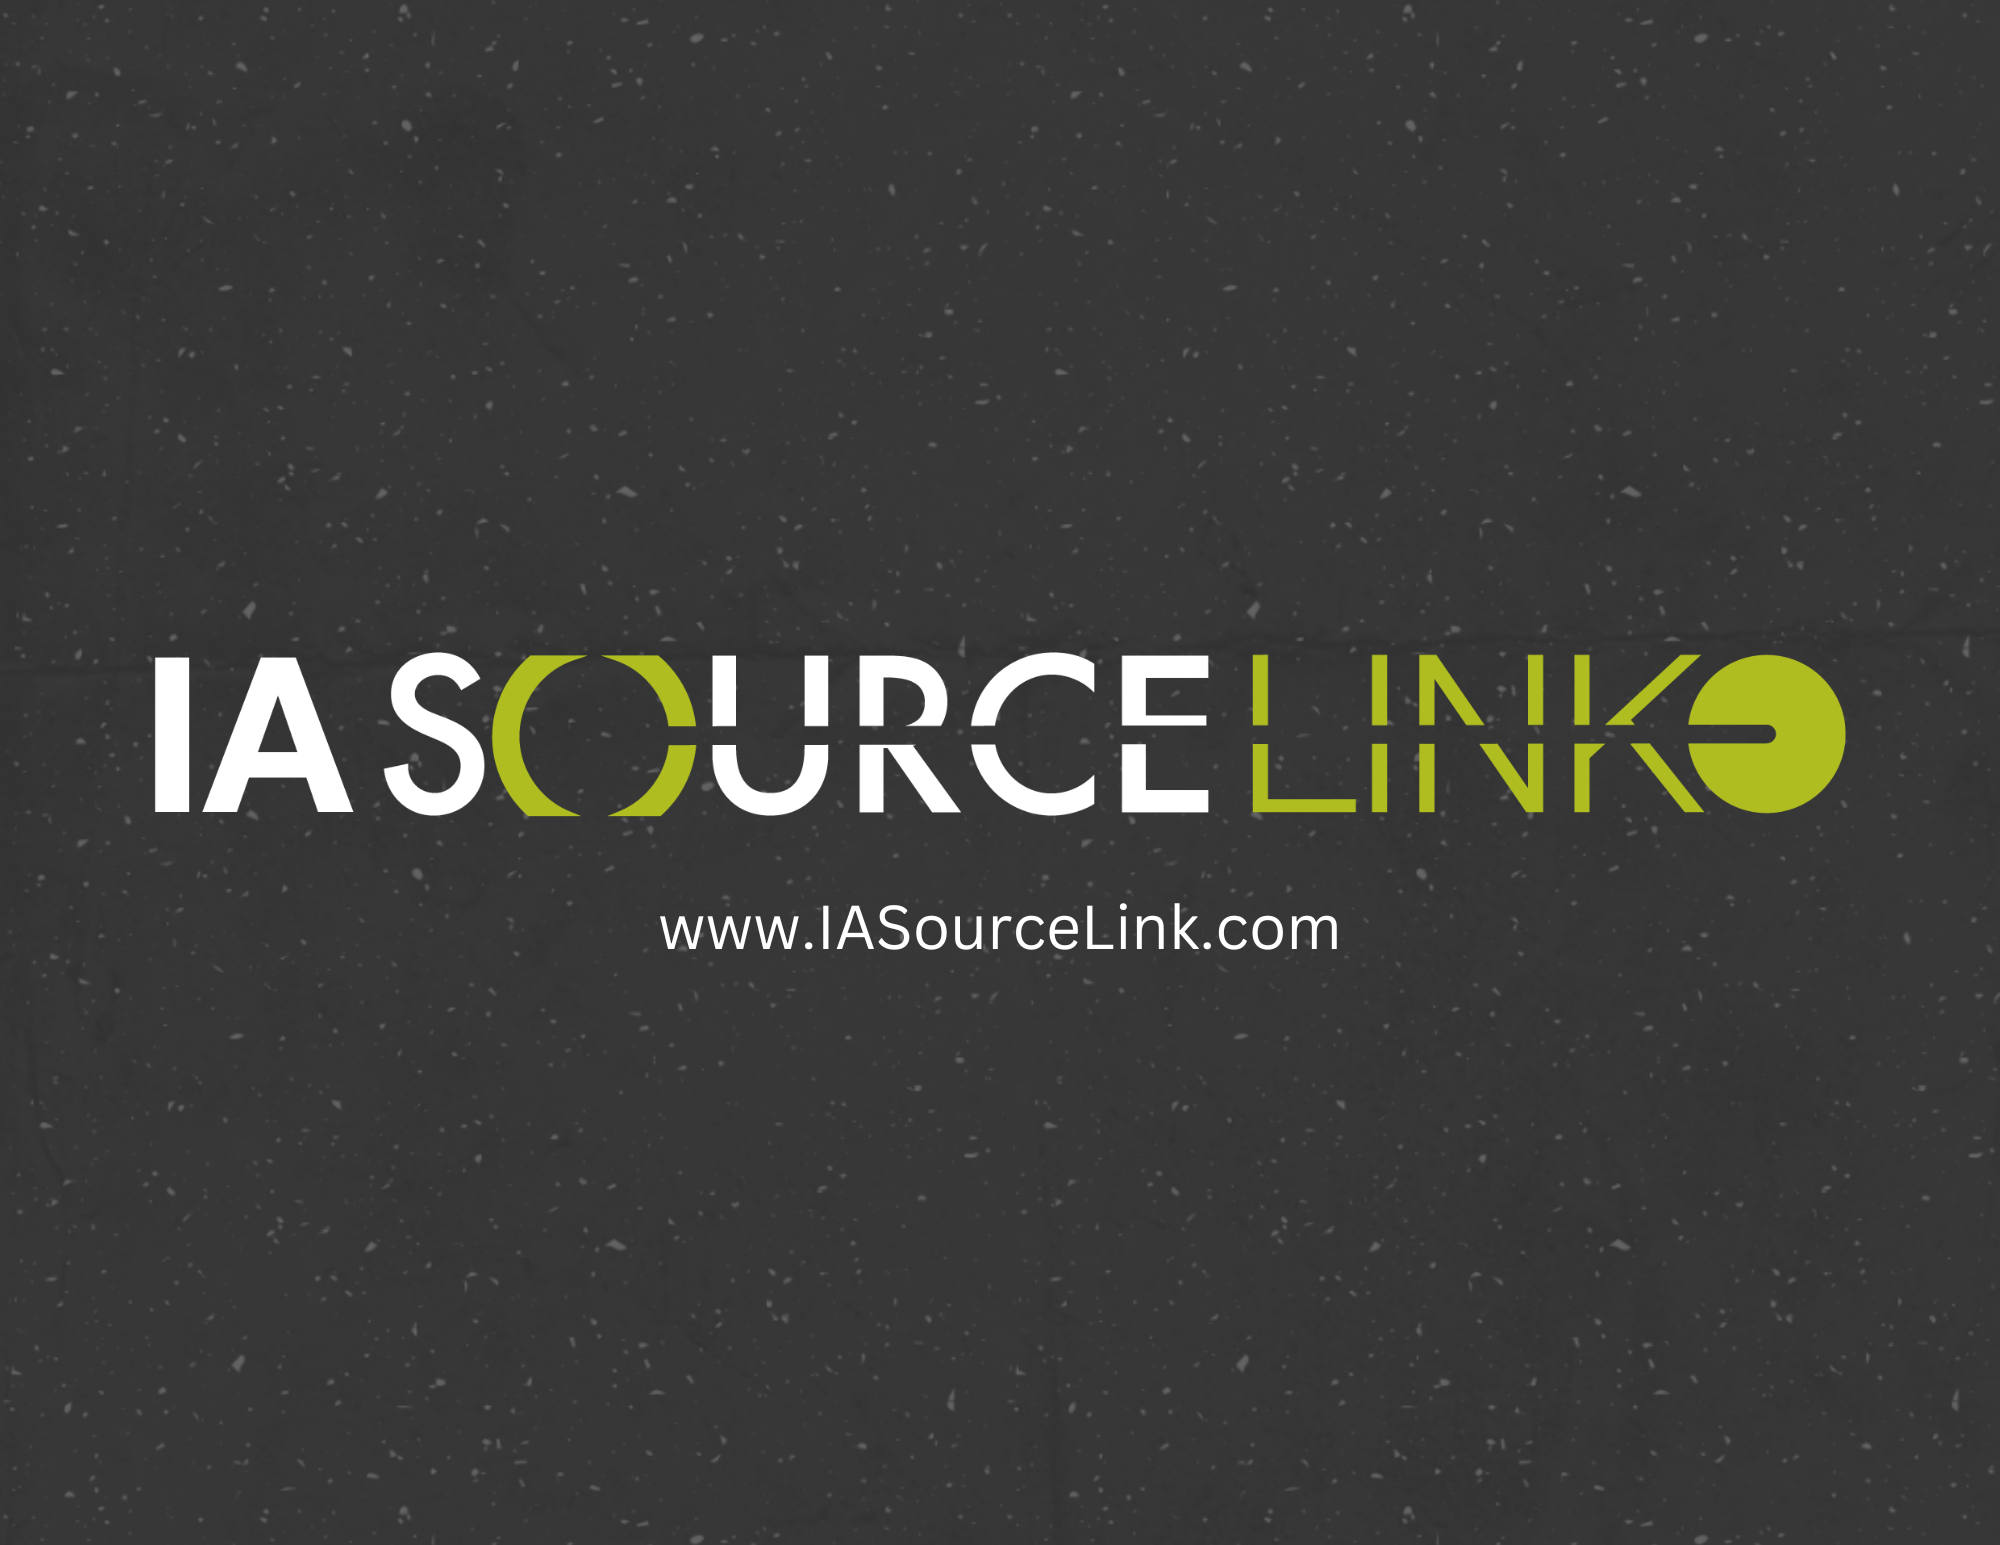 IASourceLink logo on black baground with small text with the link to their website